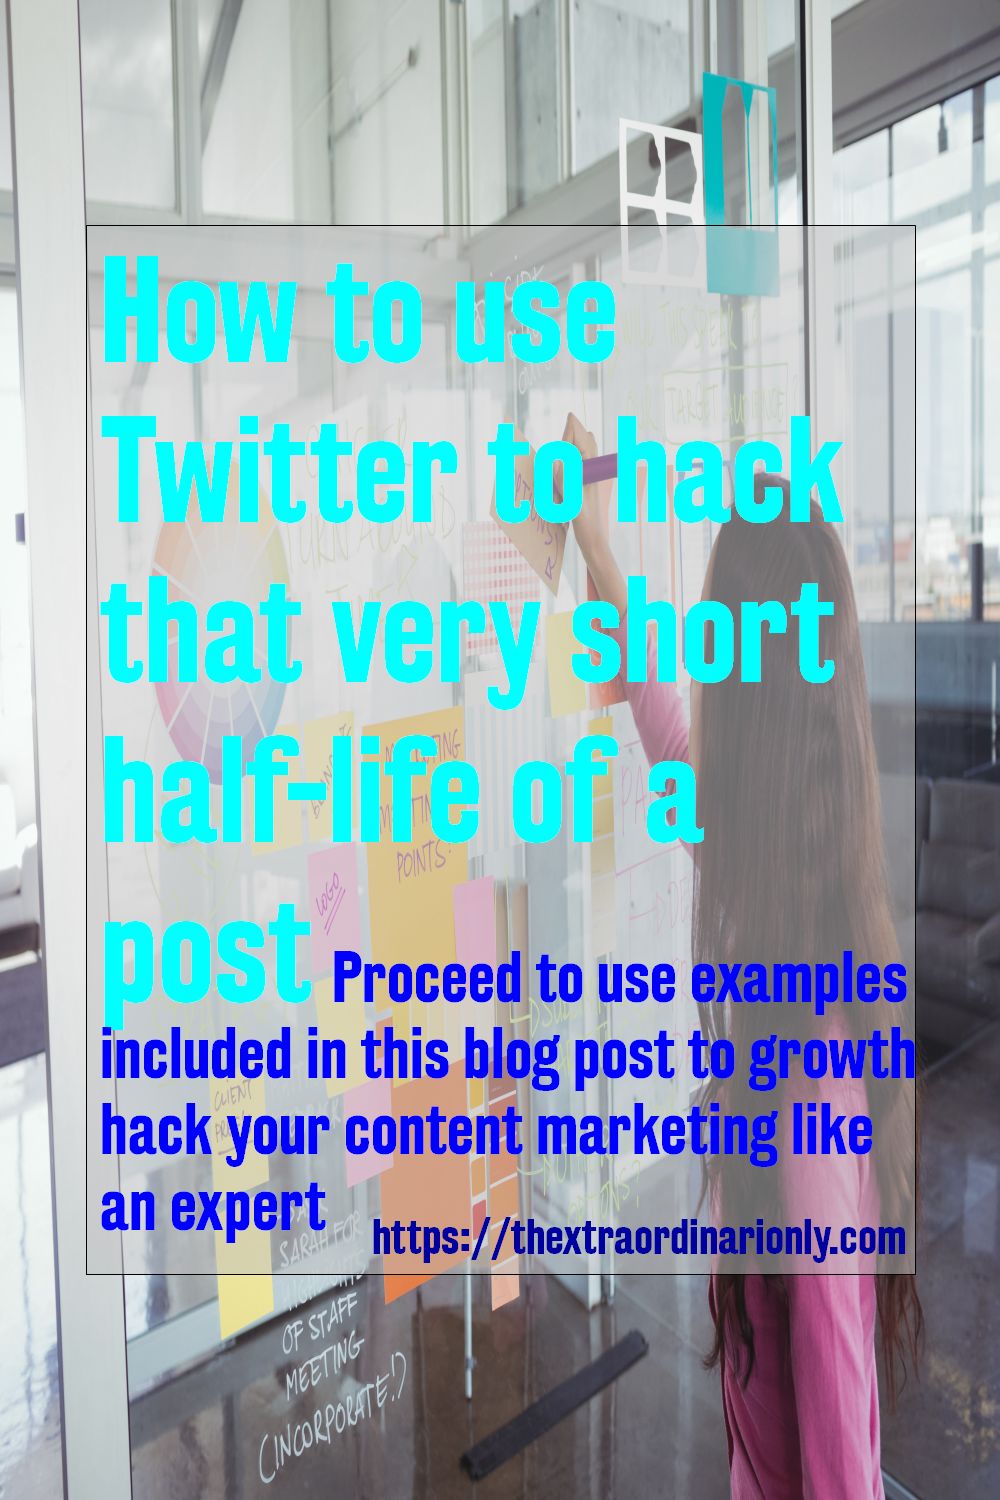 How to use Twitter tools to hack the very short half-life of a post on Twitter